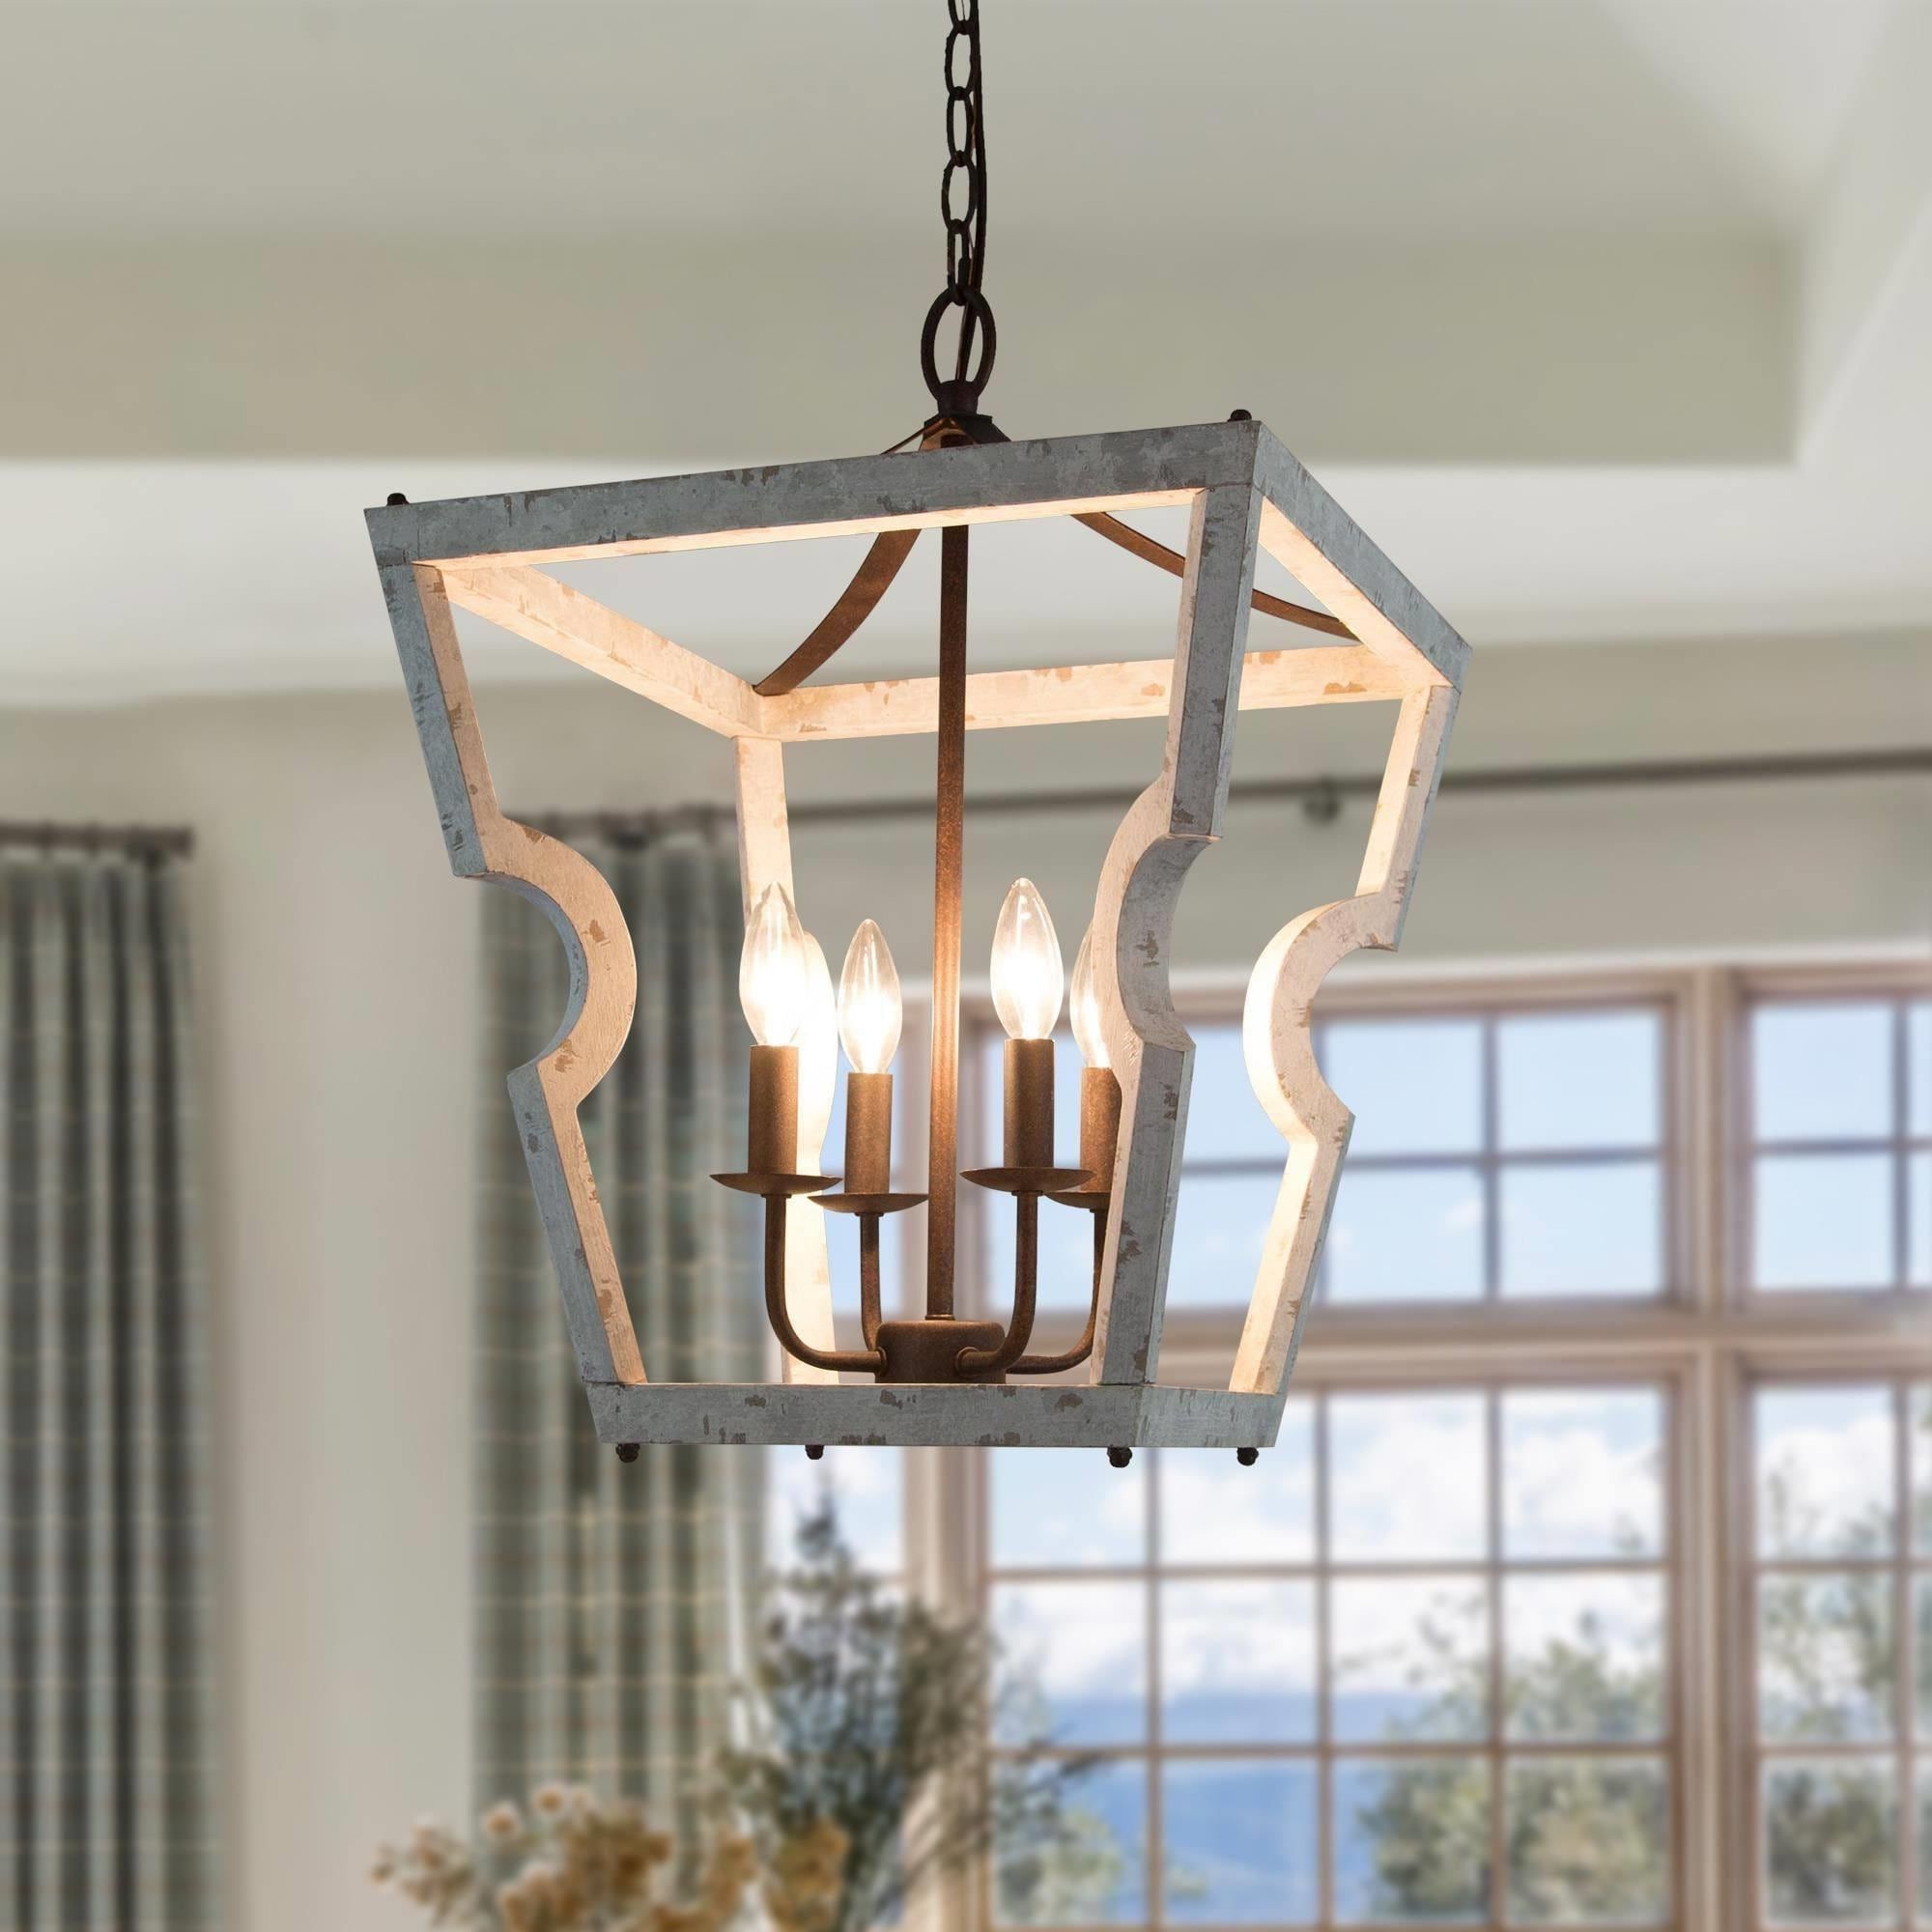 Best And Newest Rinia Rusty Farmhouse 16" 4 Light Geometric Wood Lantern Cage Island Lights  – L16" Xw16 "xh22" – On Sale – Overstock – 32291008 In Rusty Gold Lantern Chandeliers (View 13 of 15)